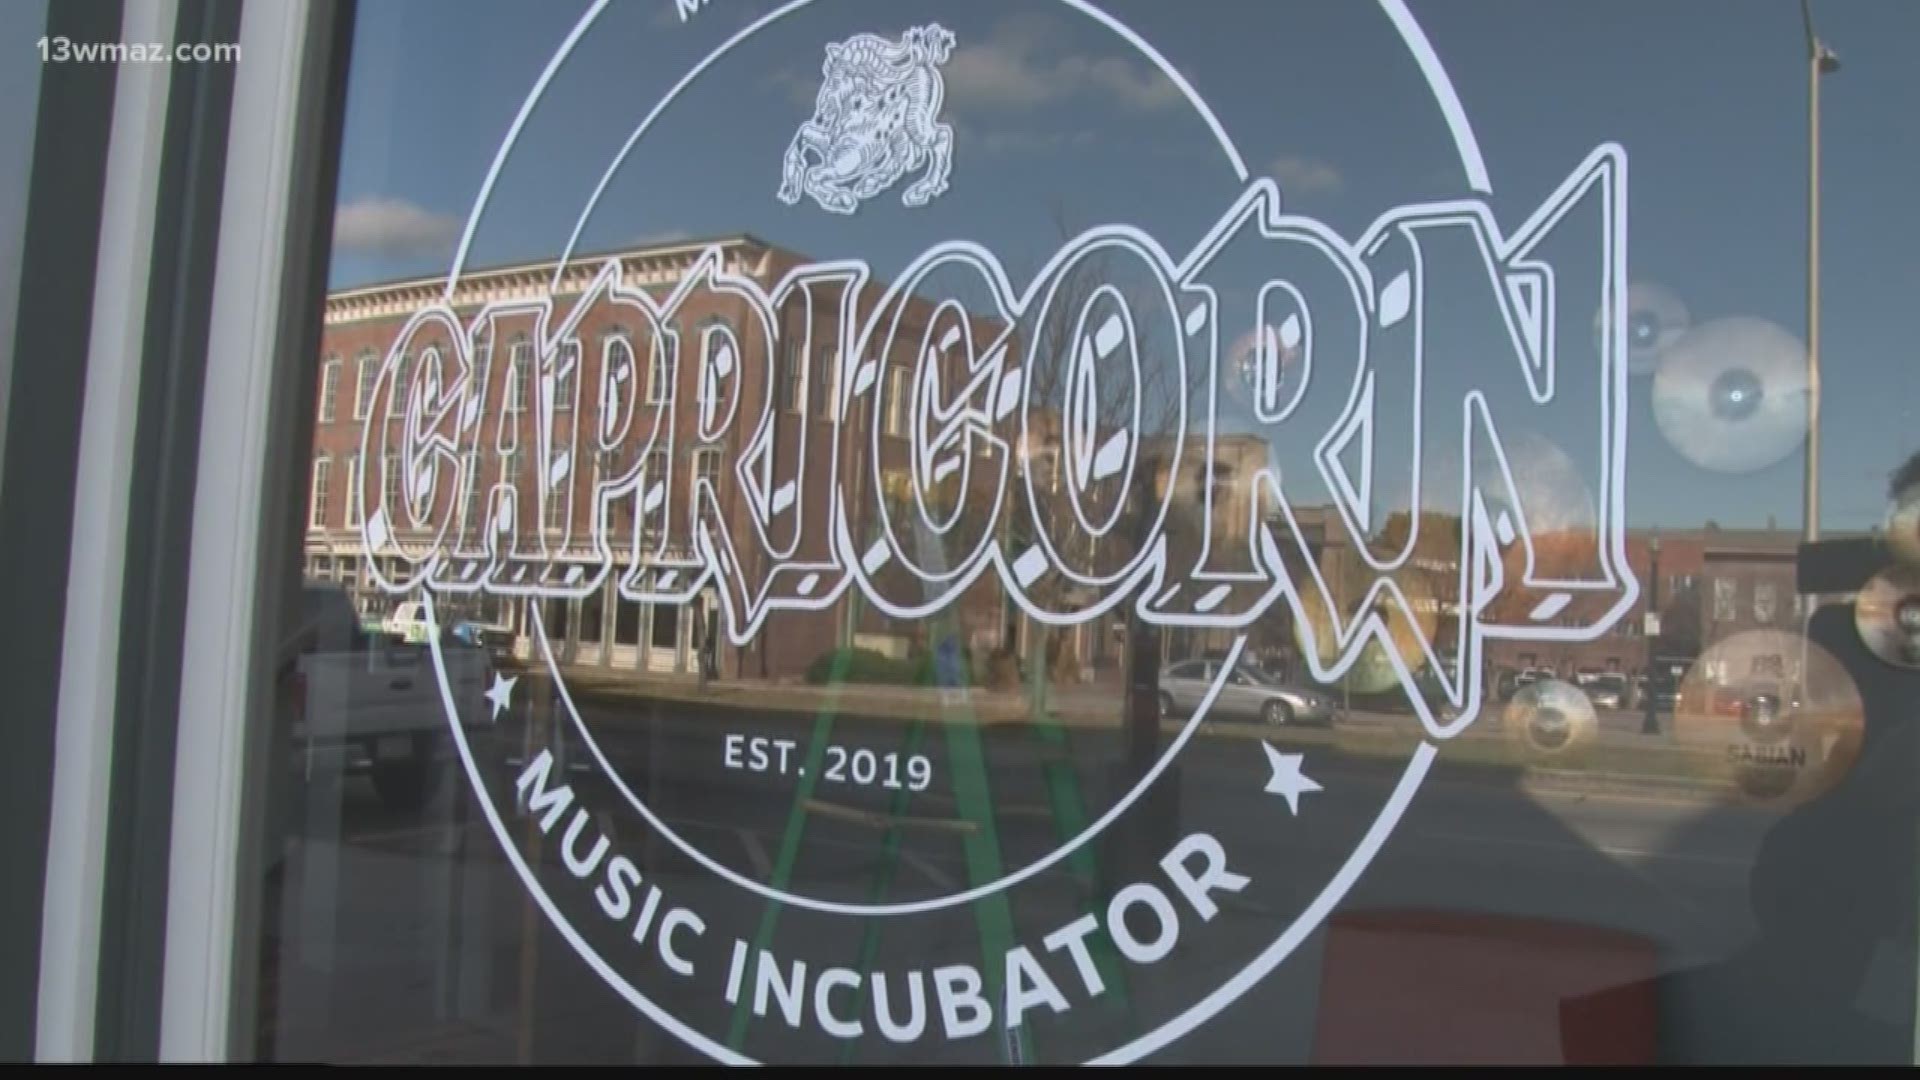 Mercer University Senior Vice President Larry Brumley says the Capricorn party is for all the people who helped bring the music landmark back to life.